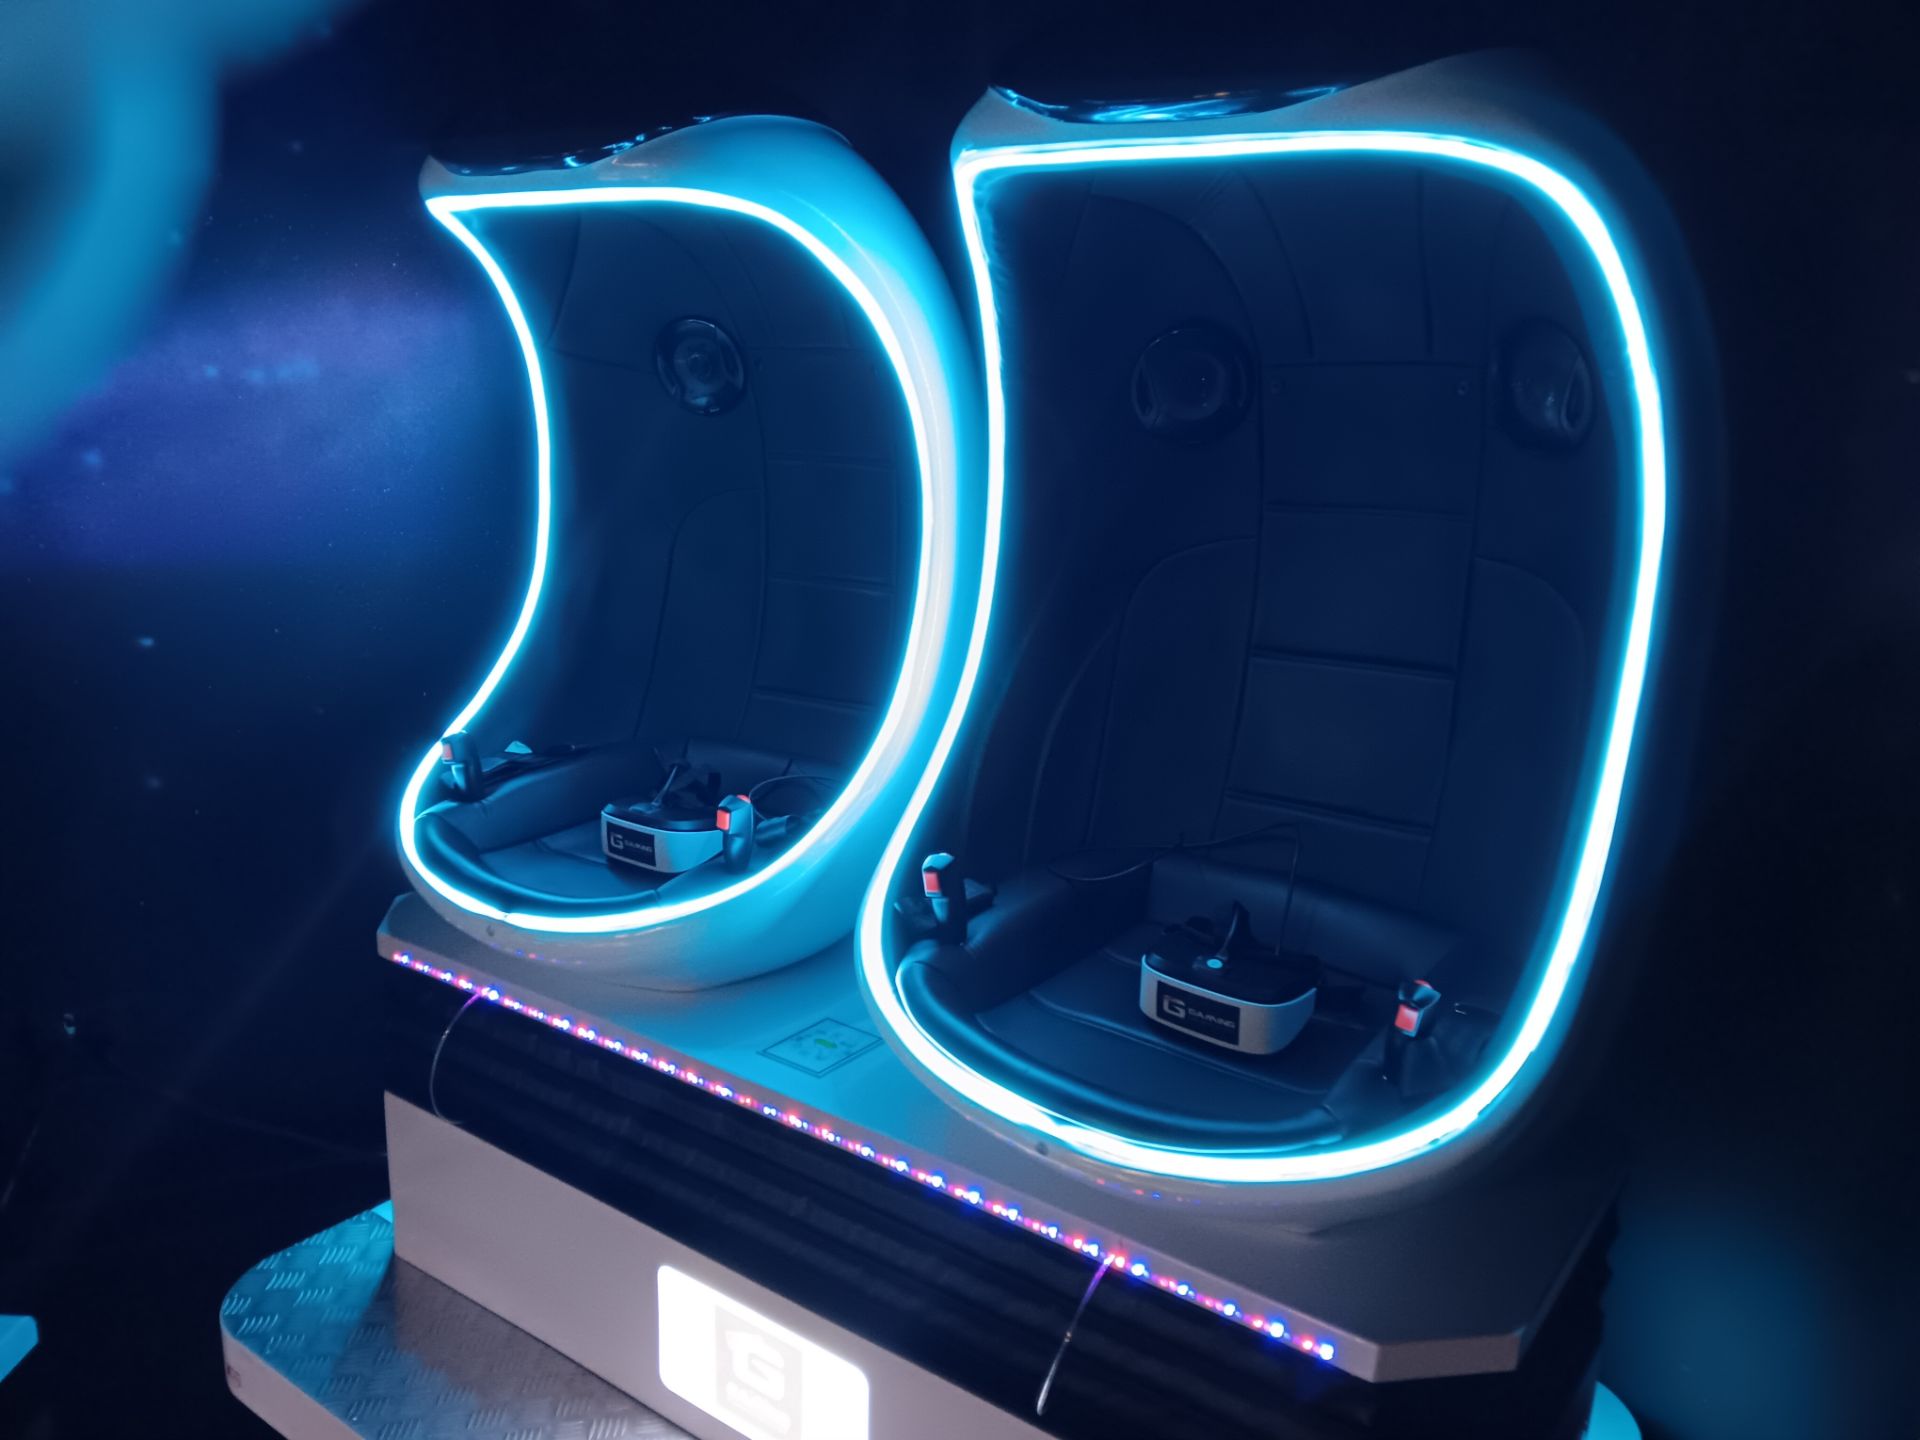 Movie Power 2-Person Twin Pod VR Motion Ride Cinema/Games Simulator – Cost New £9,600 – Buyer to - Image 4 of 4